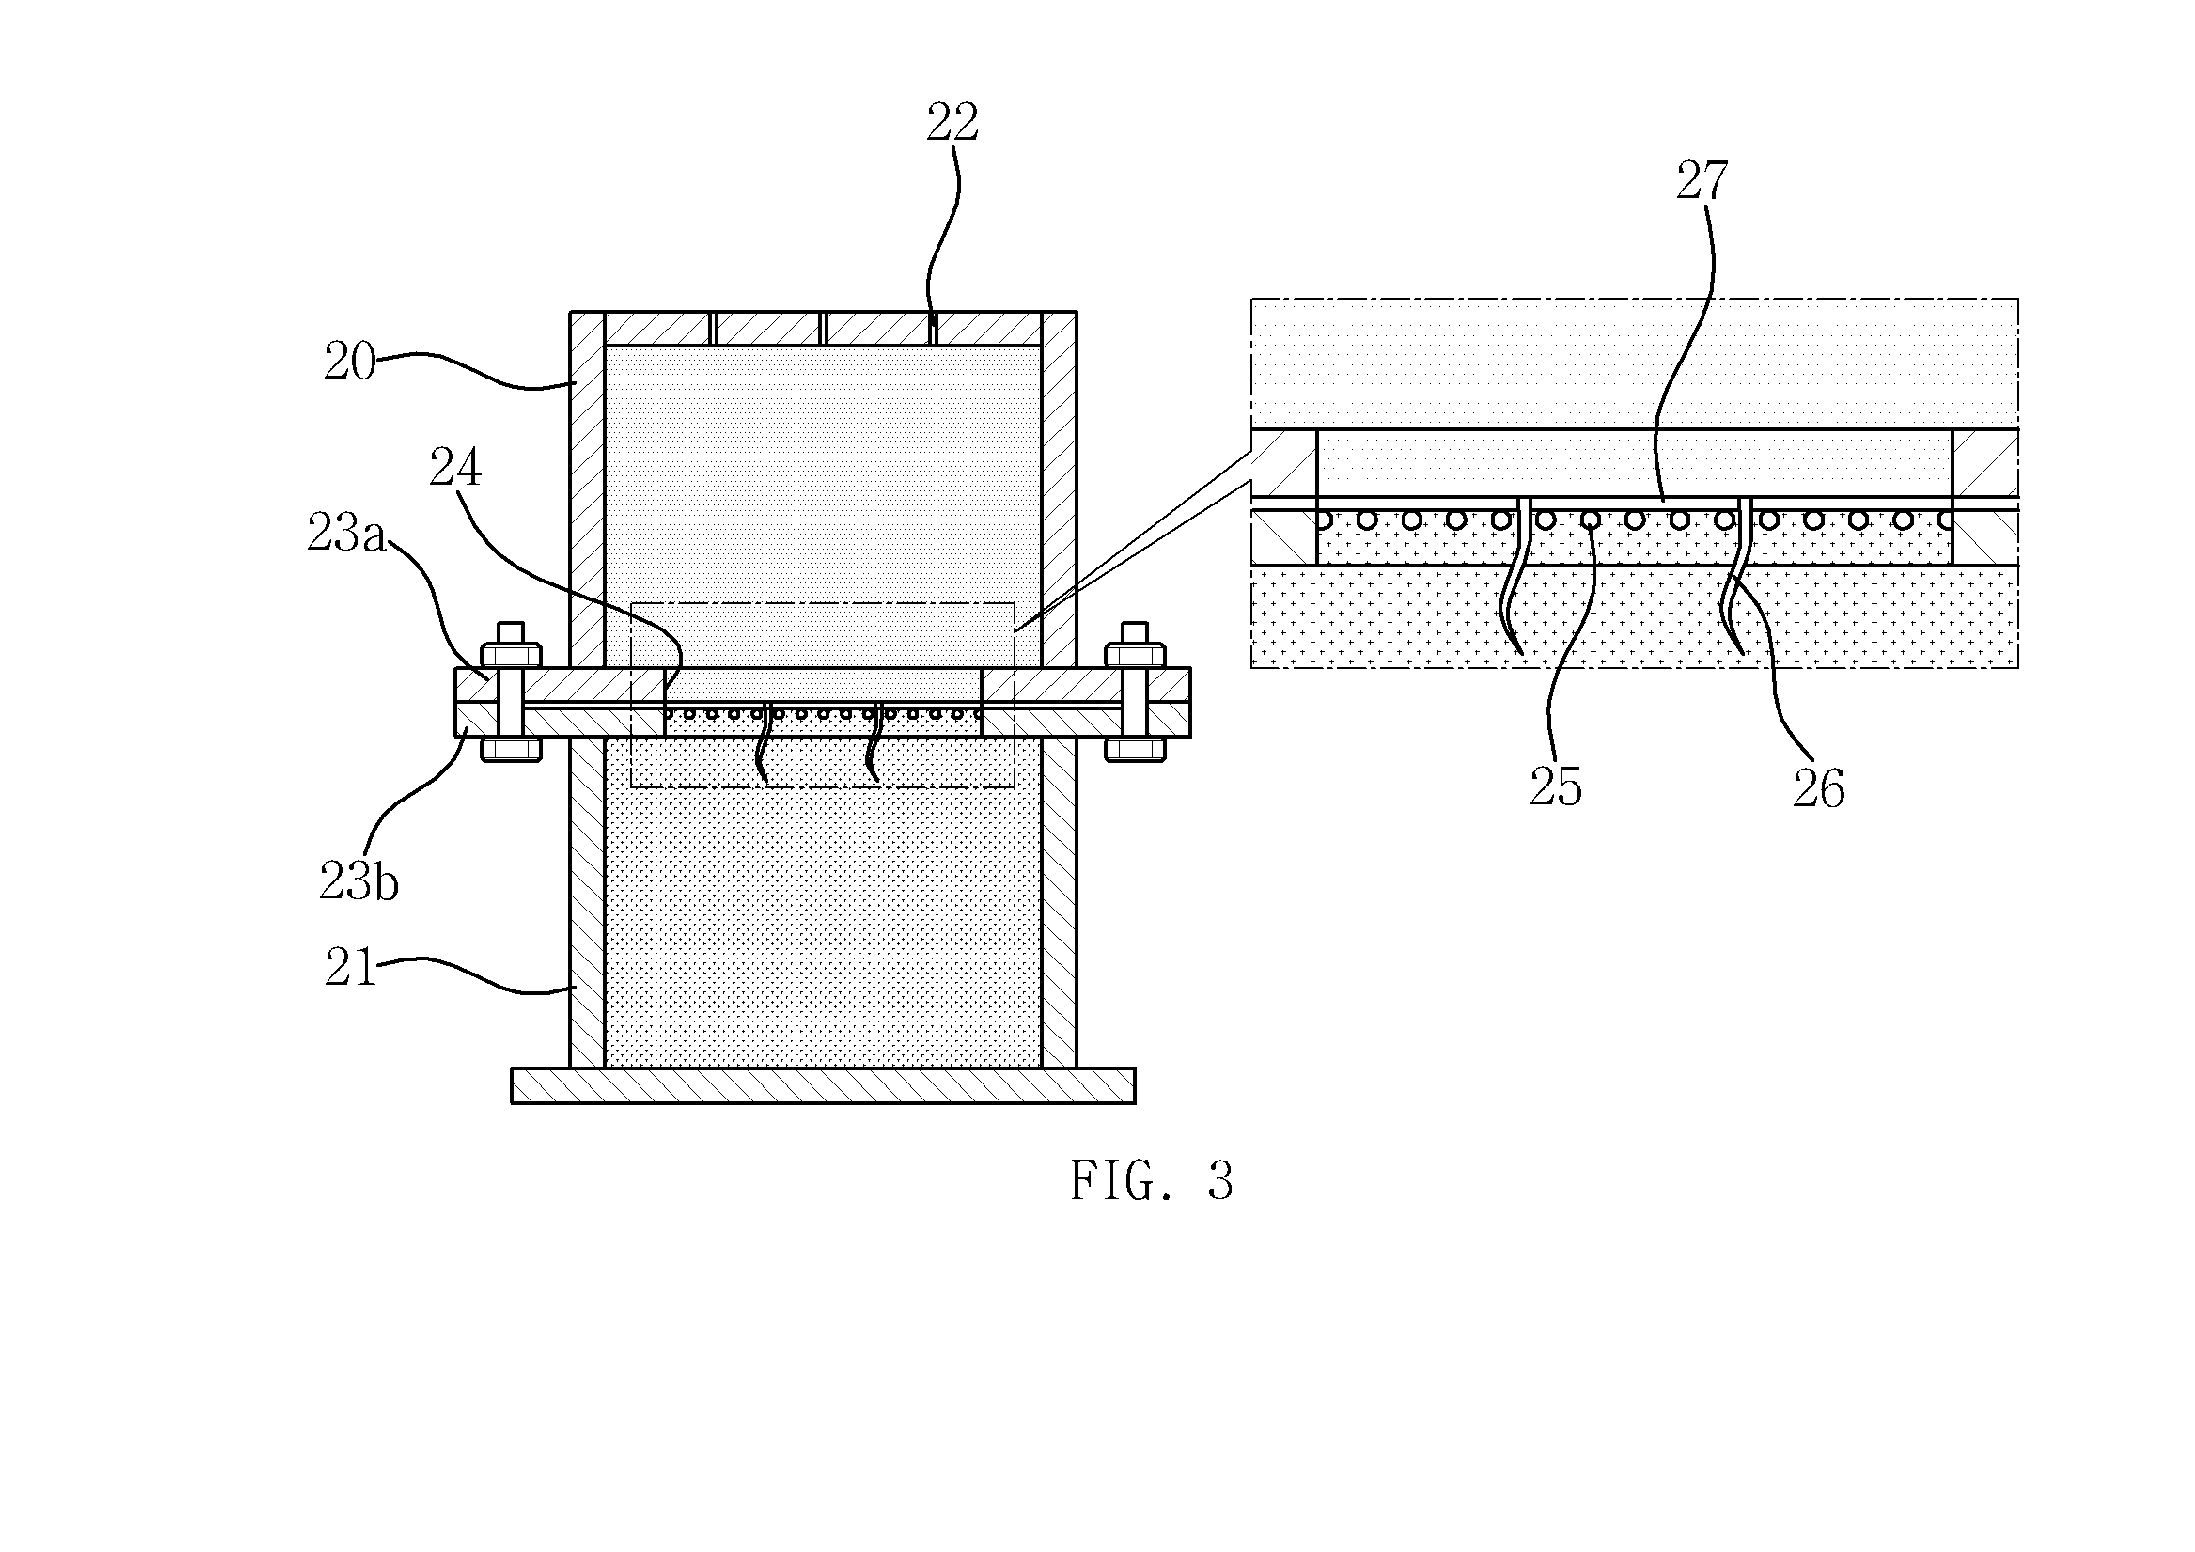 Pinhole inspection system and apparatus for membrane electrode assembly of fuel cell